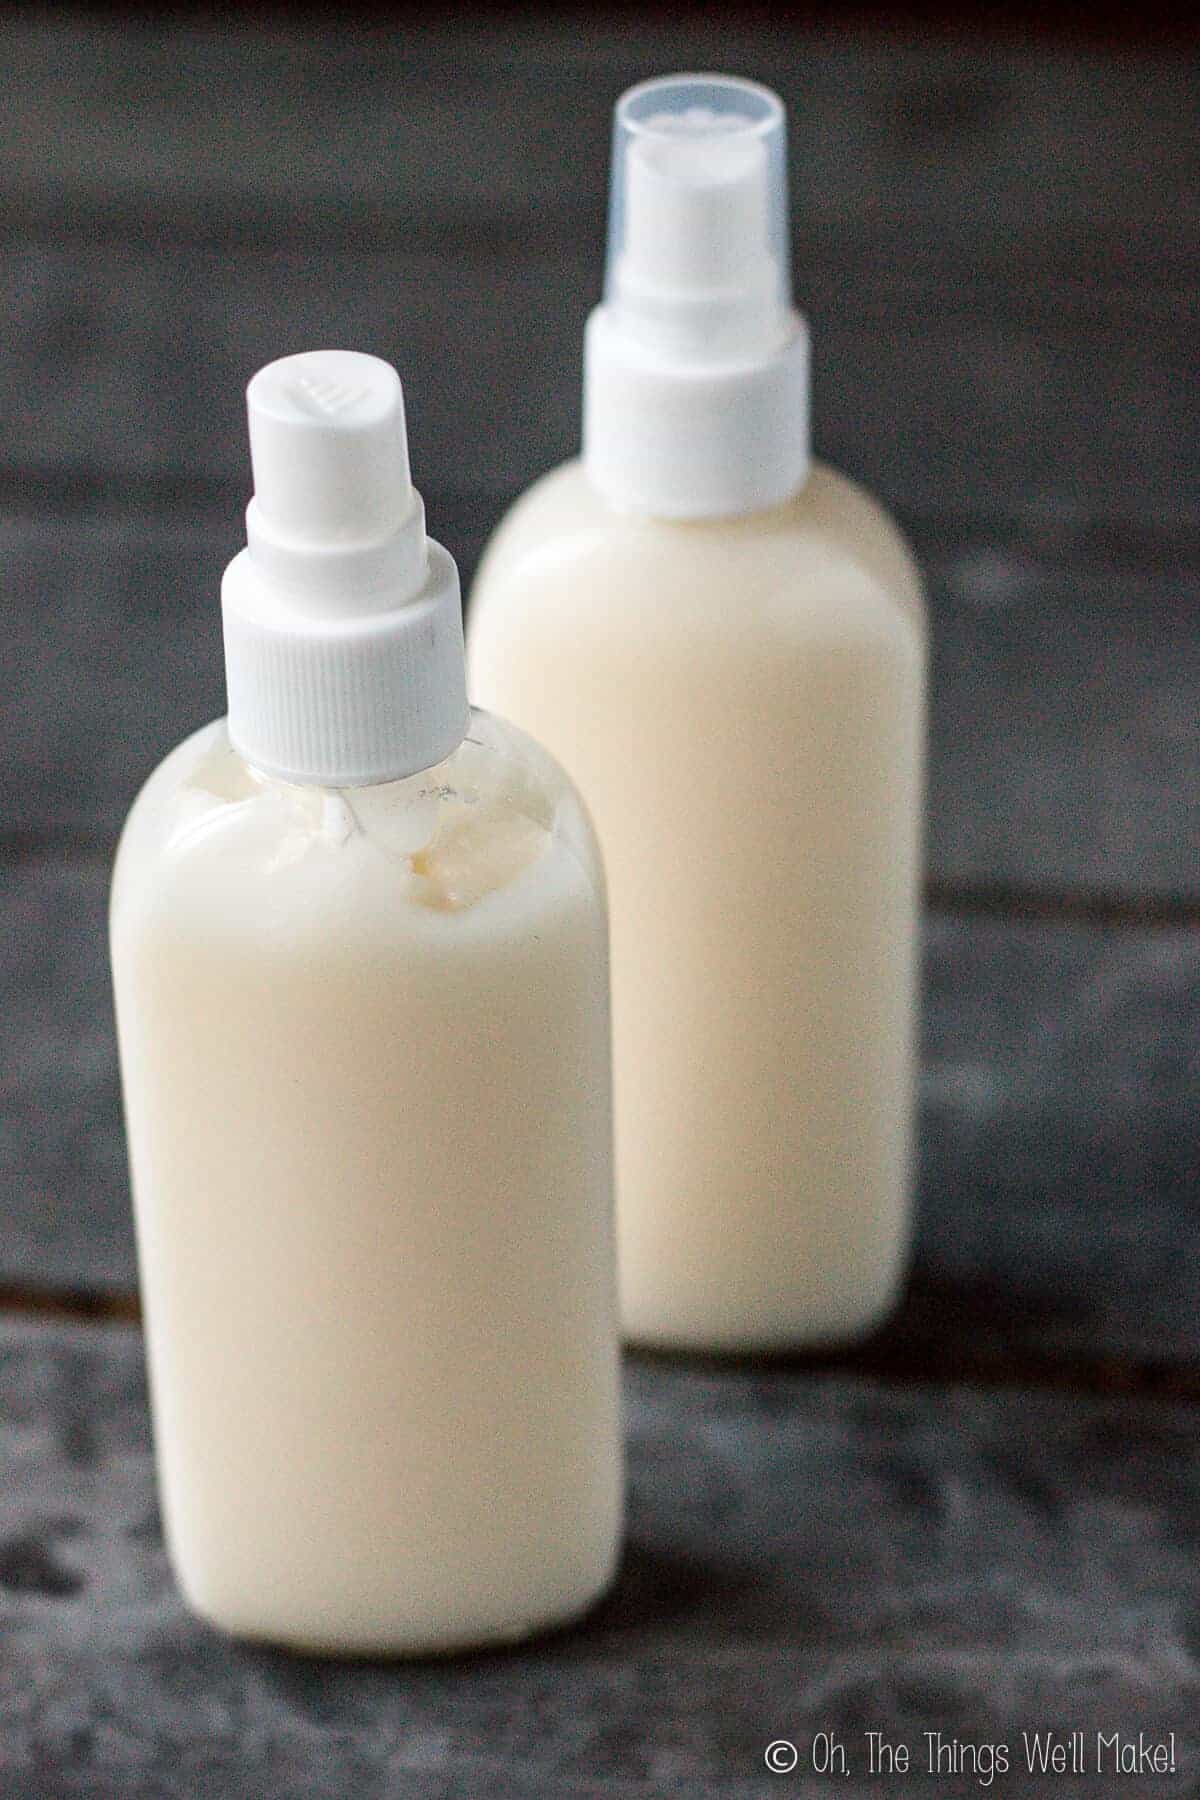 Two bottles of a homemade conditioner